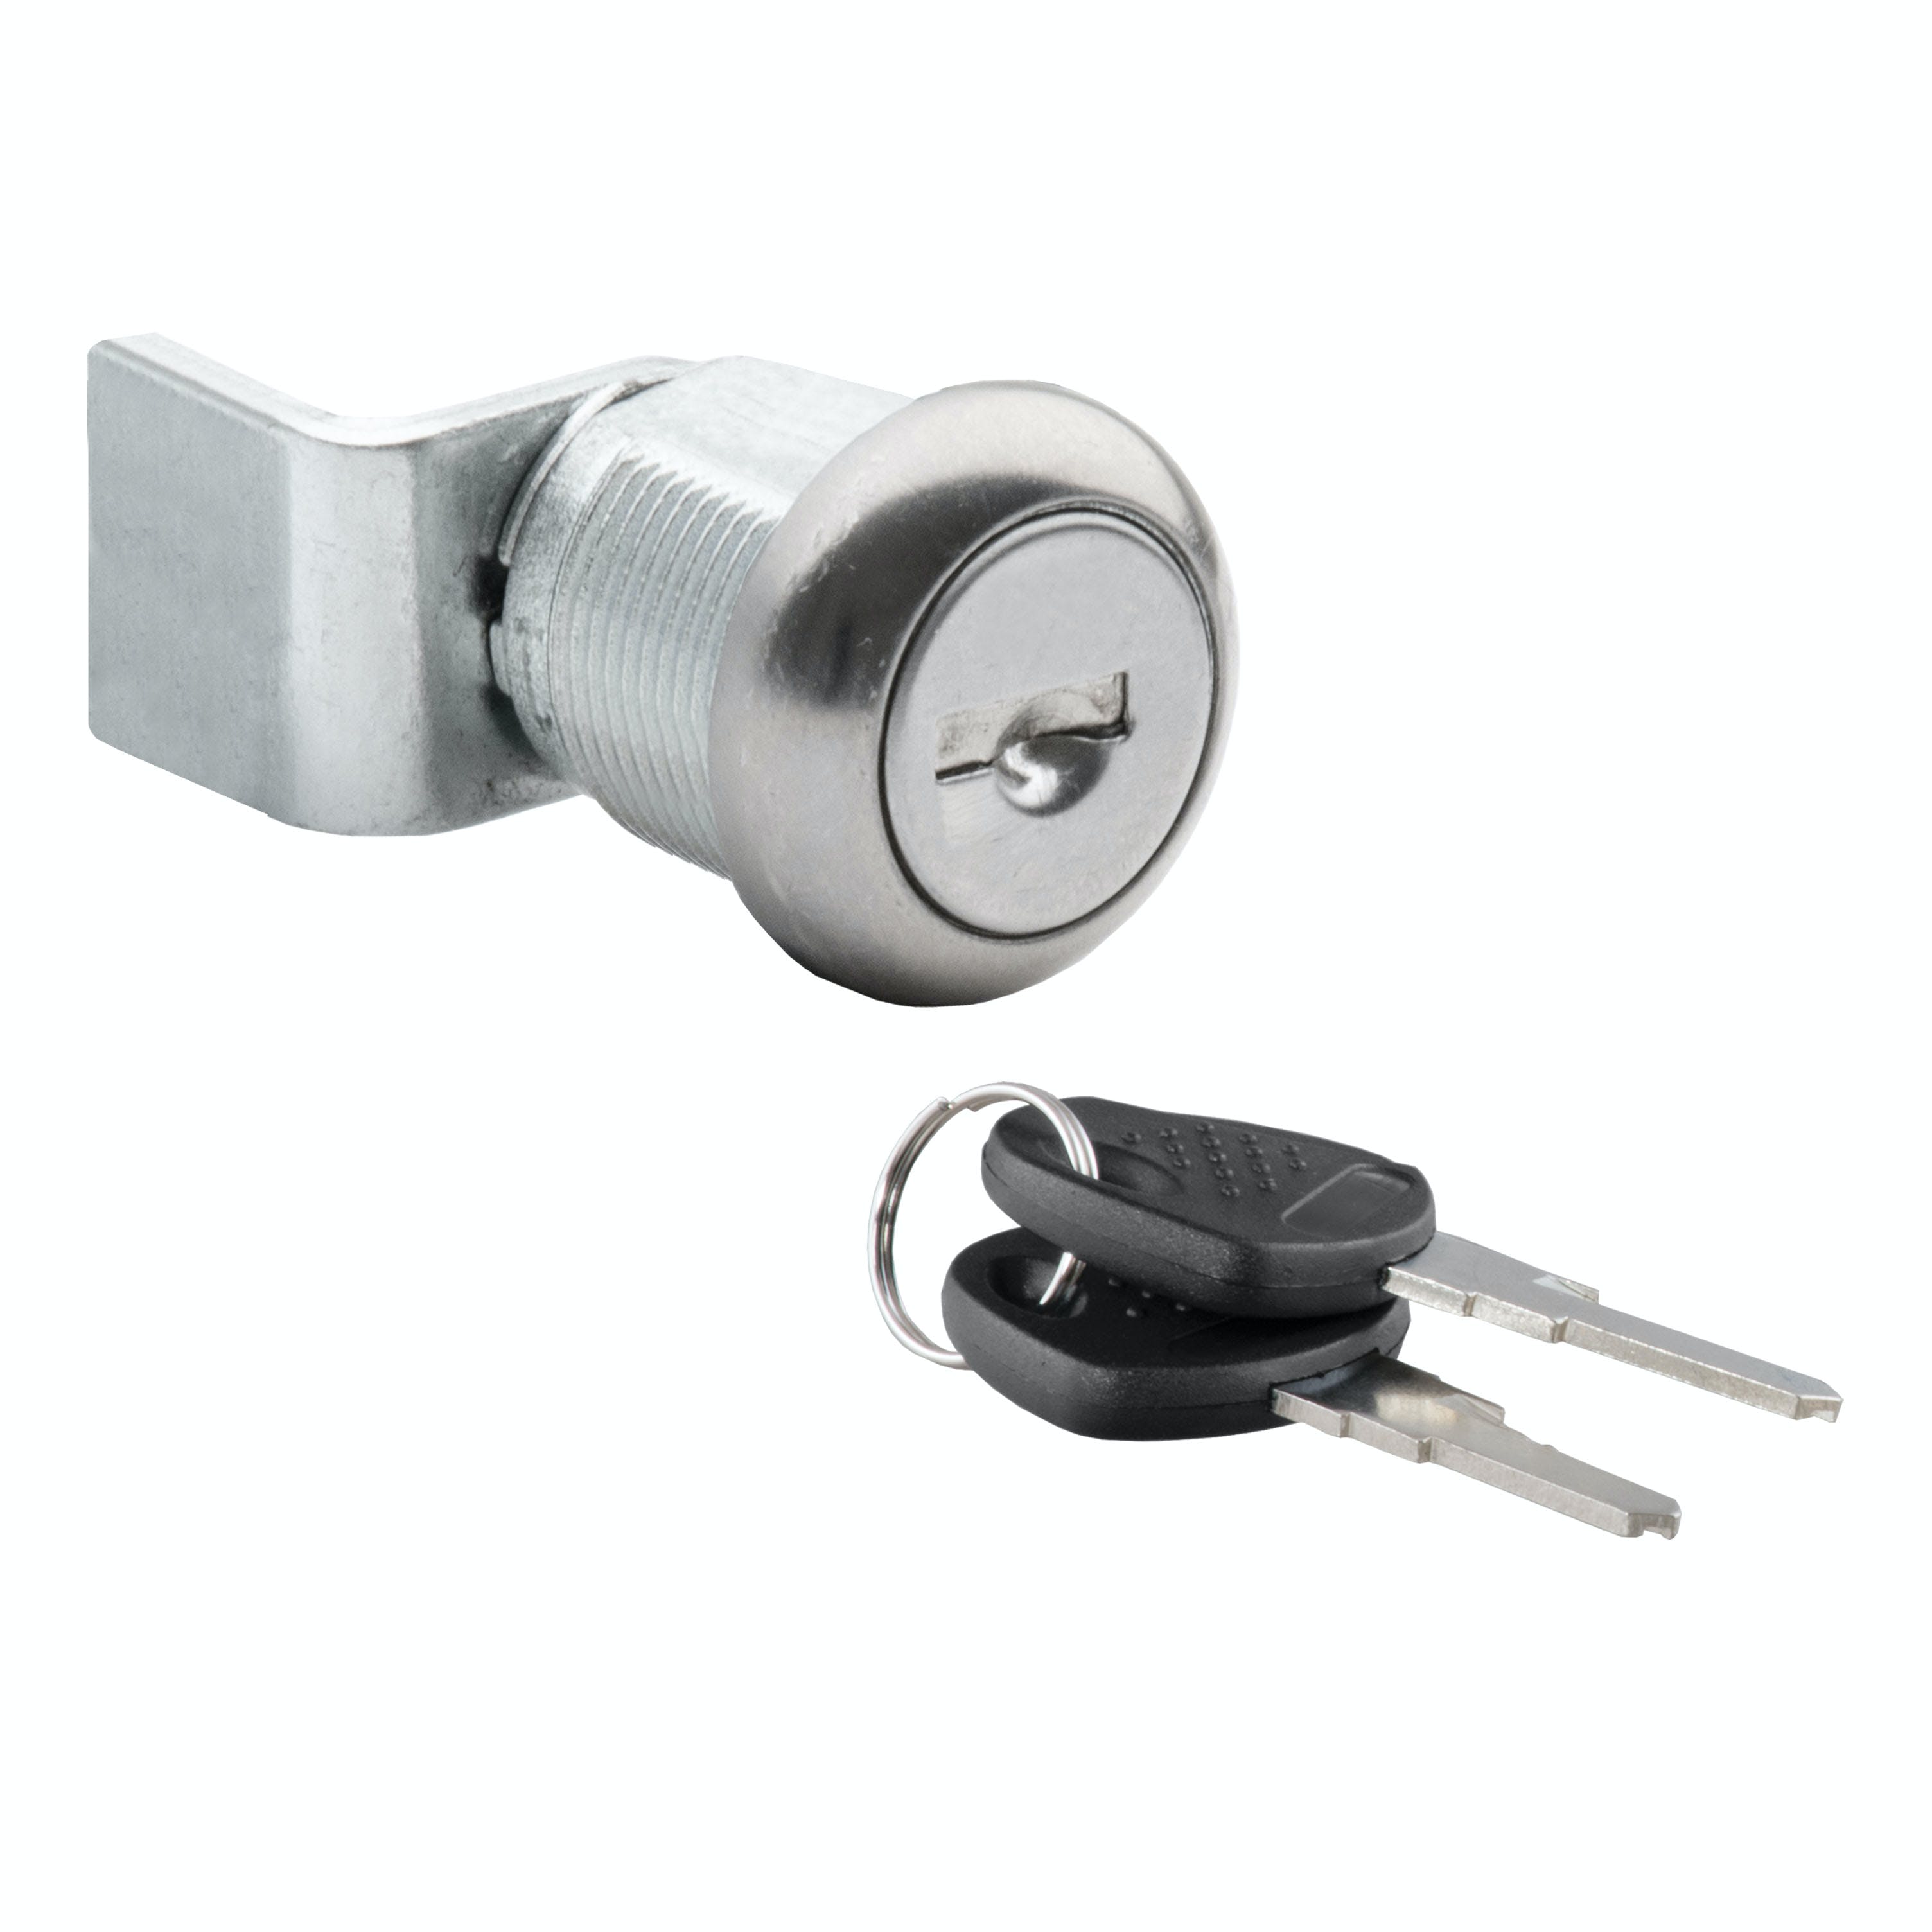 UWS 003-RYTHCY-003 Replacement T-Handle Lock Cylinder and Keys